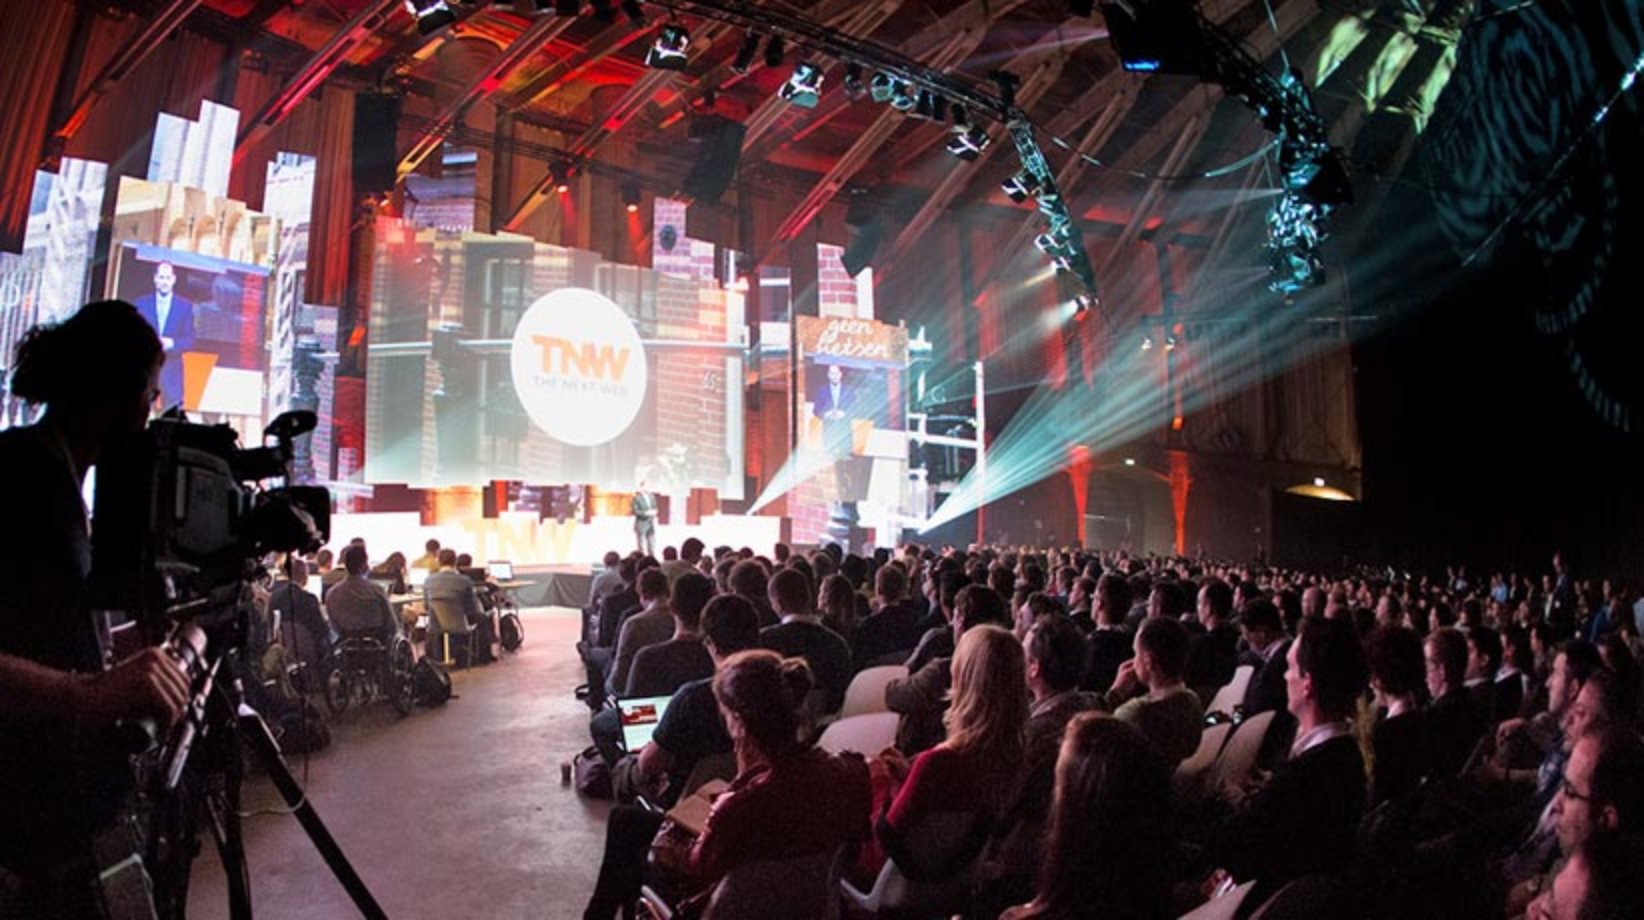 TNW Tech conference